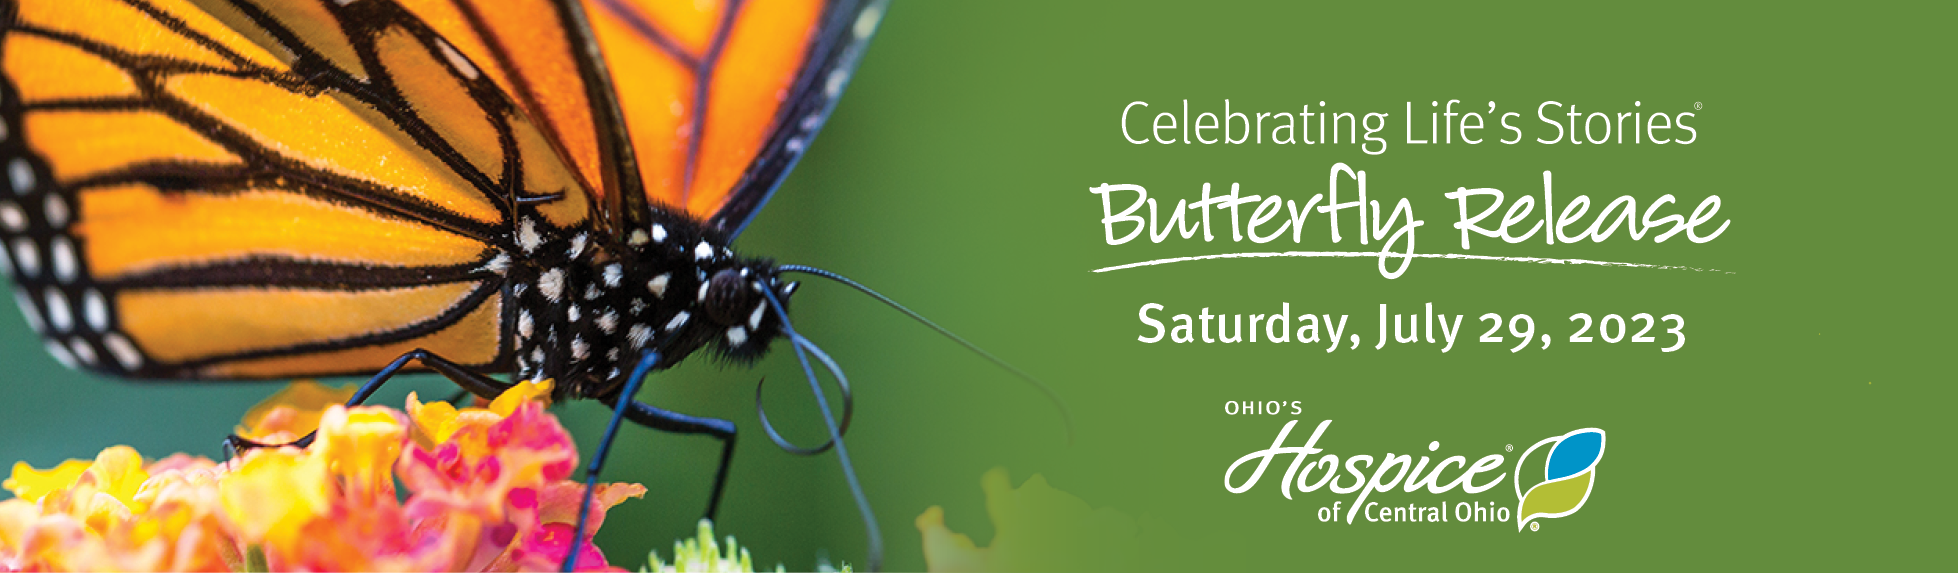 Ohio's Hospice of Central Ohio Celebrating Life's Stories 2023 Butterfly Release Saturday, July 29, 2023